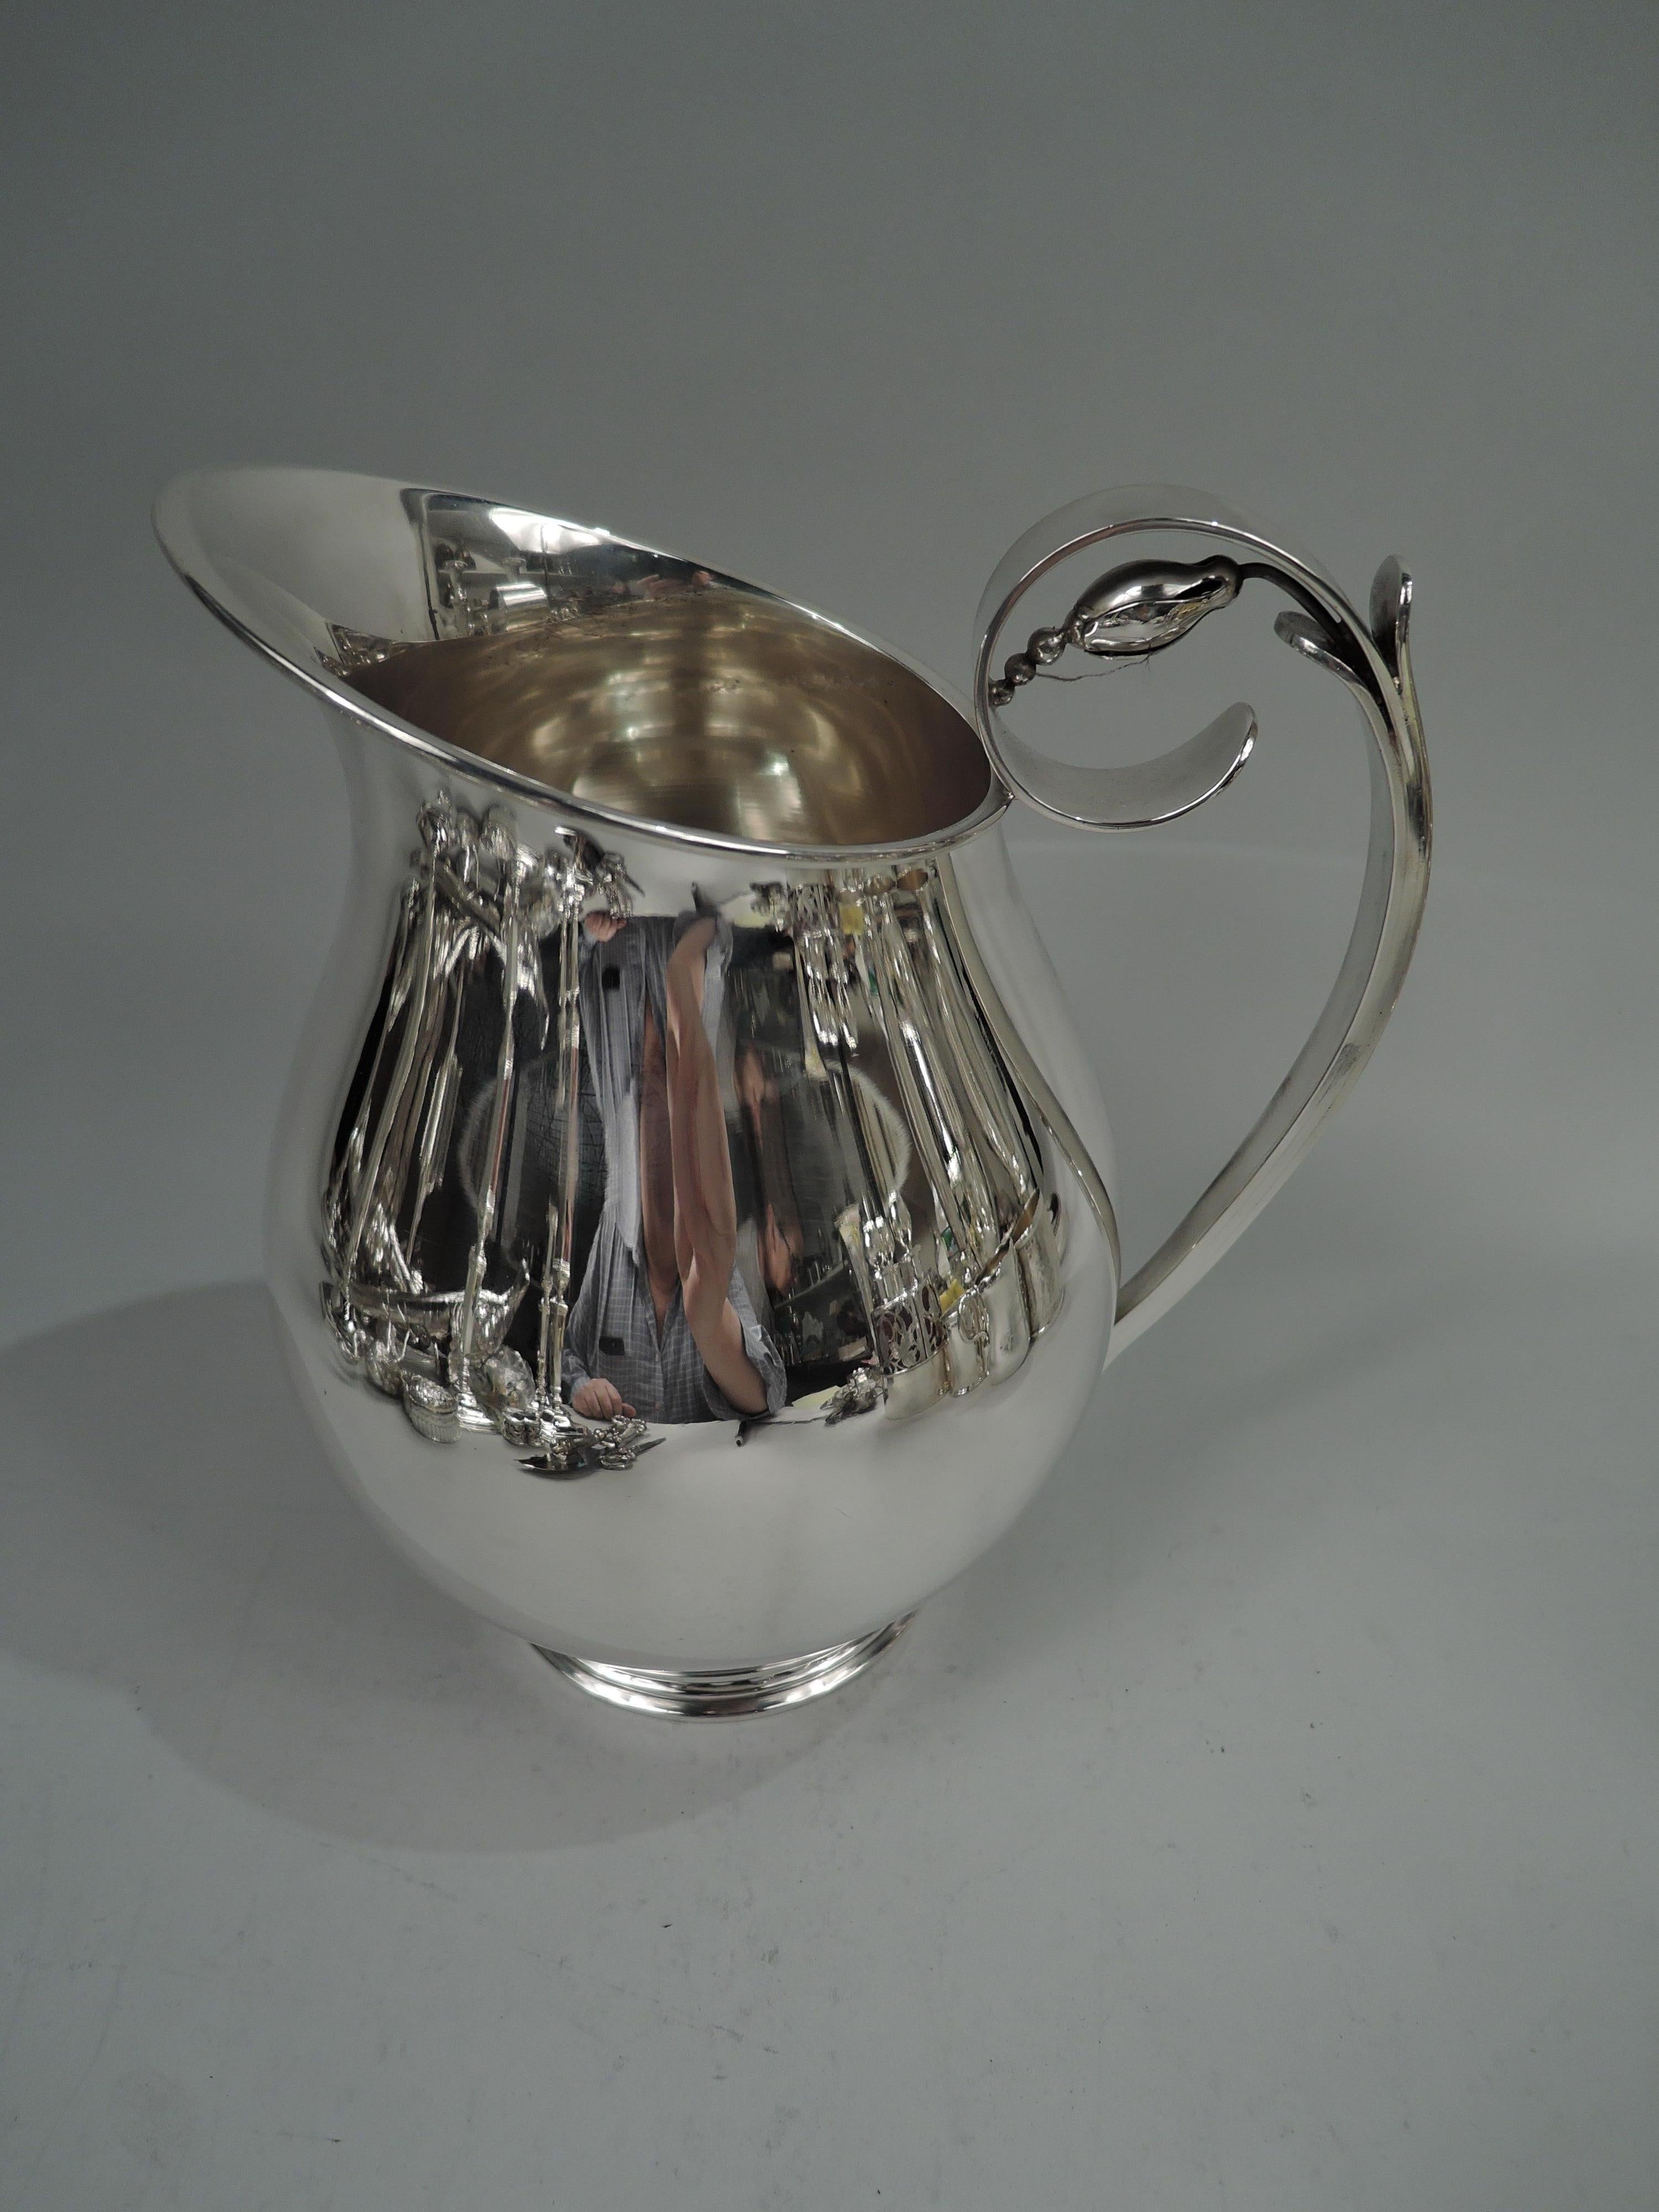 Midcentury Modern sterling silver water pitcher. Made by International Silver Co. in Connecticut. Baluster with asymmetrical oval mouth; stepped and round foot ring with flat beading. High-looping handle with wrapped with abstract leaves; scroll